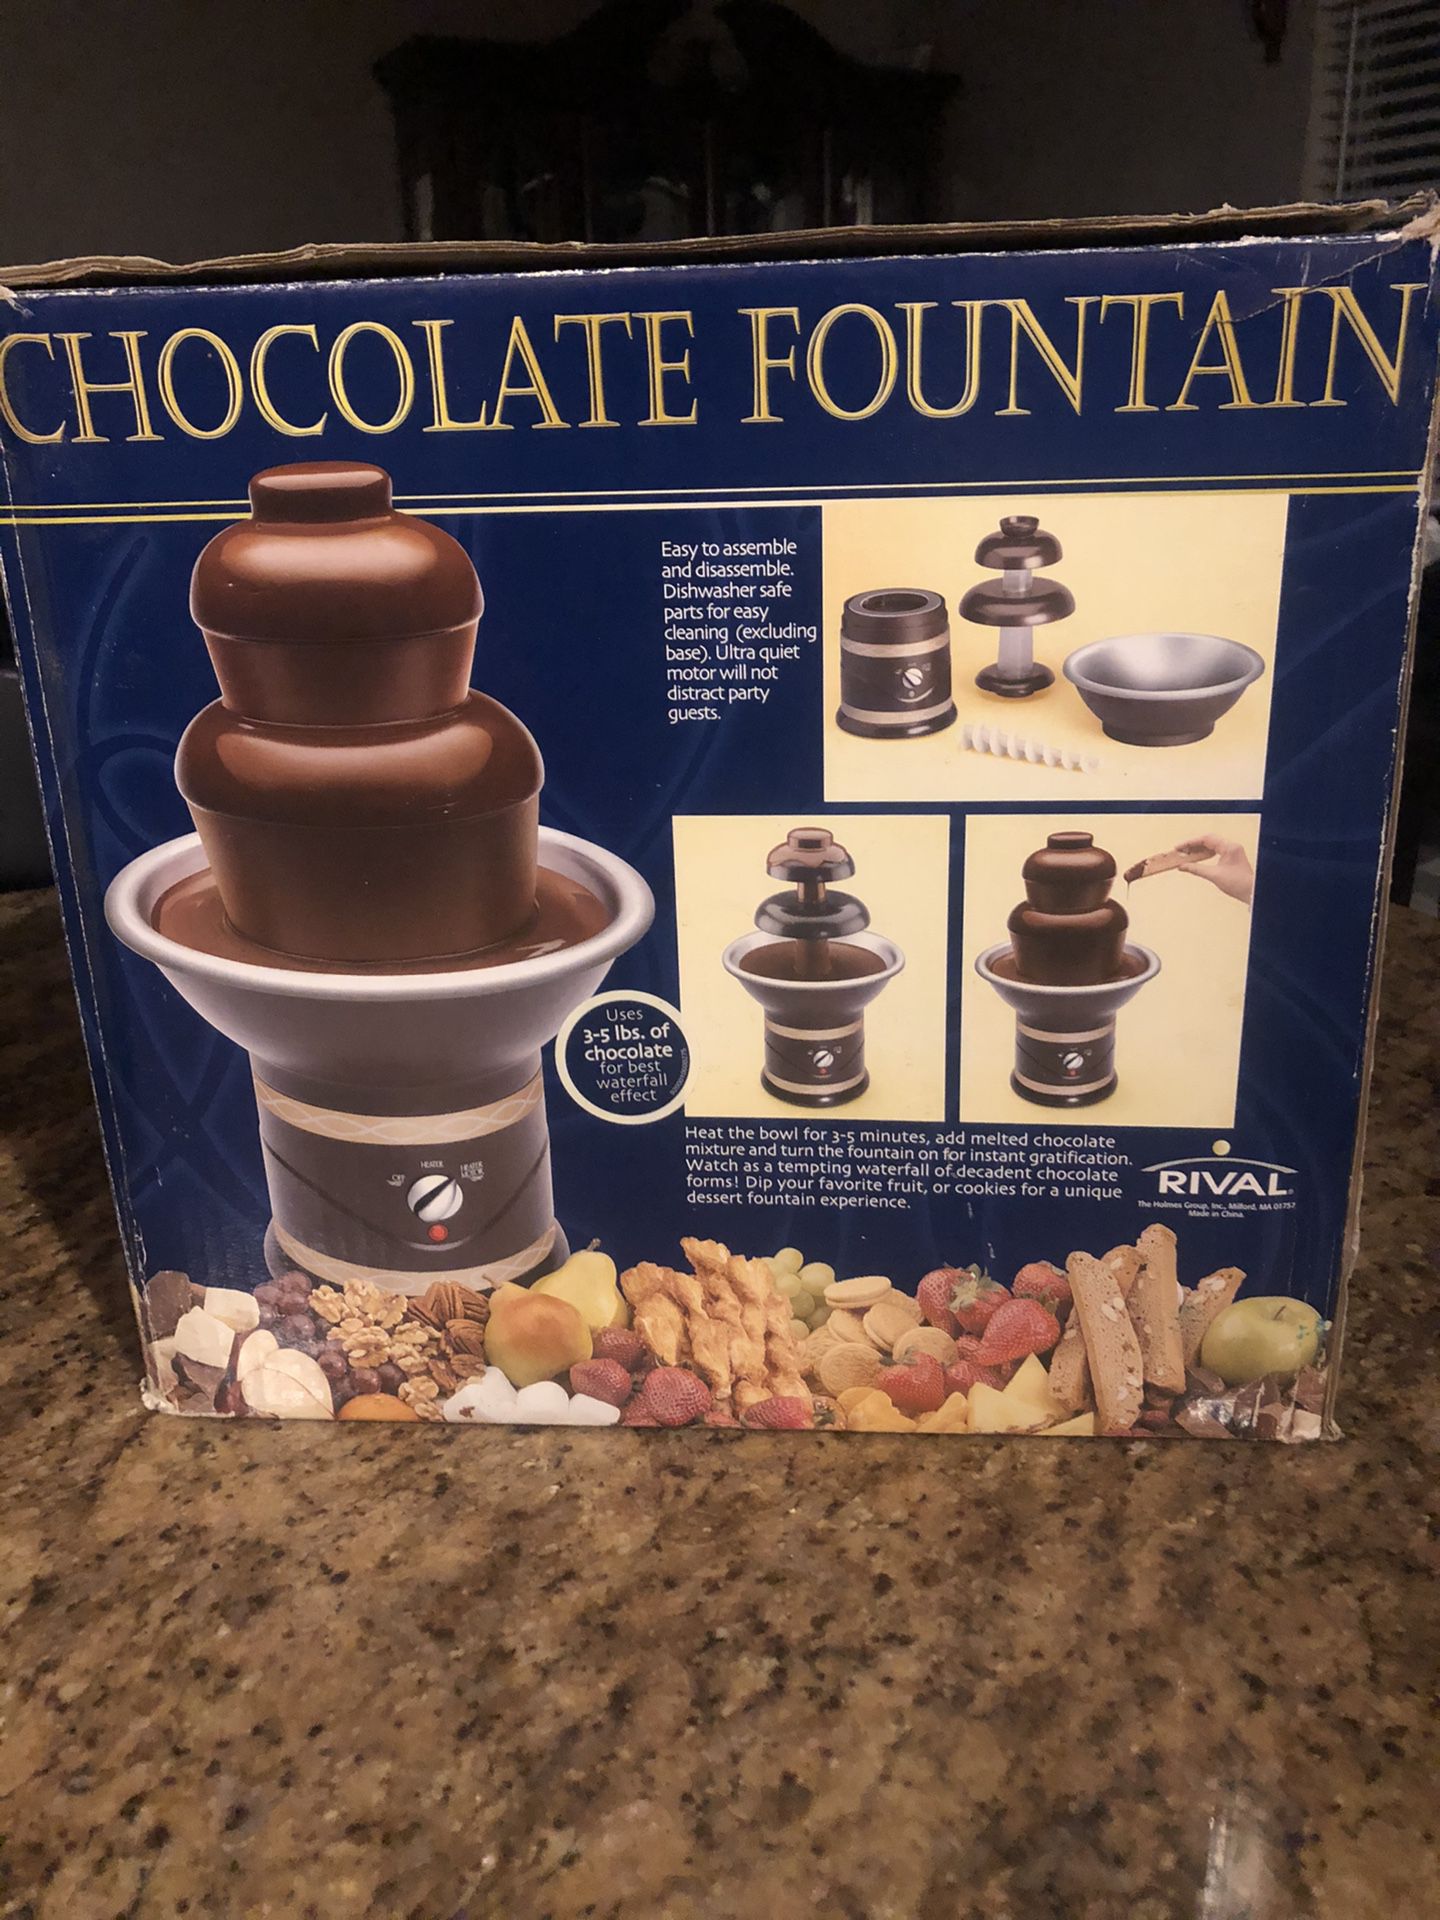 Chocolate Fountain uses 5 pounds of chocolate